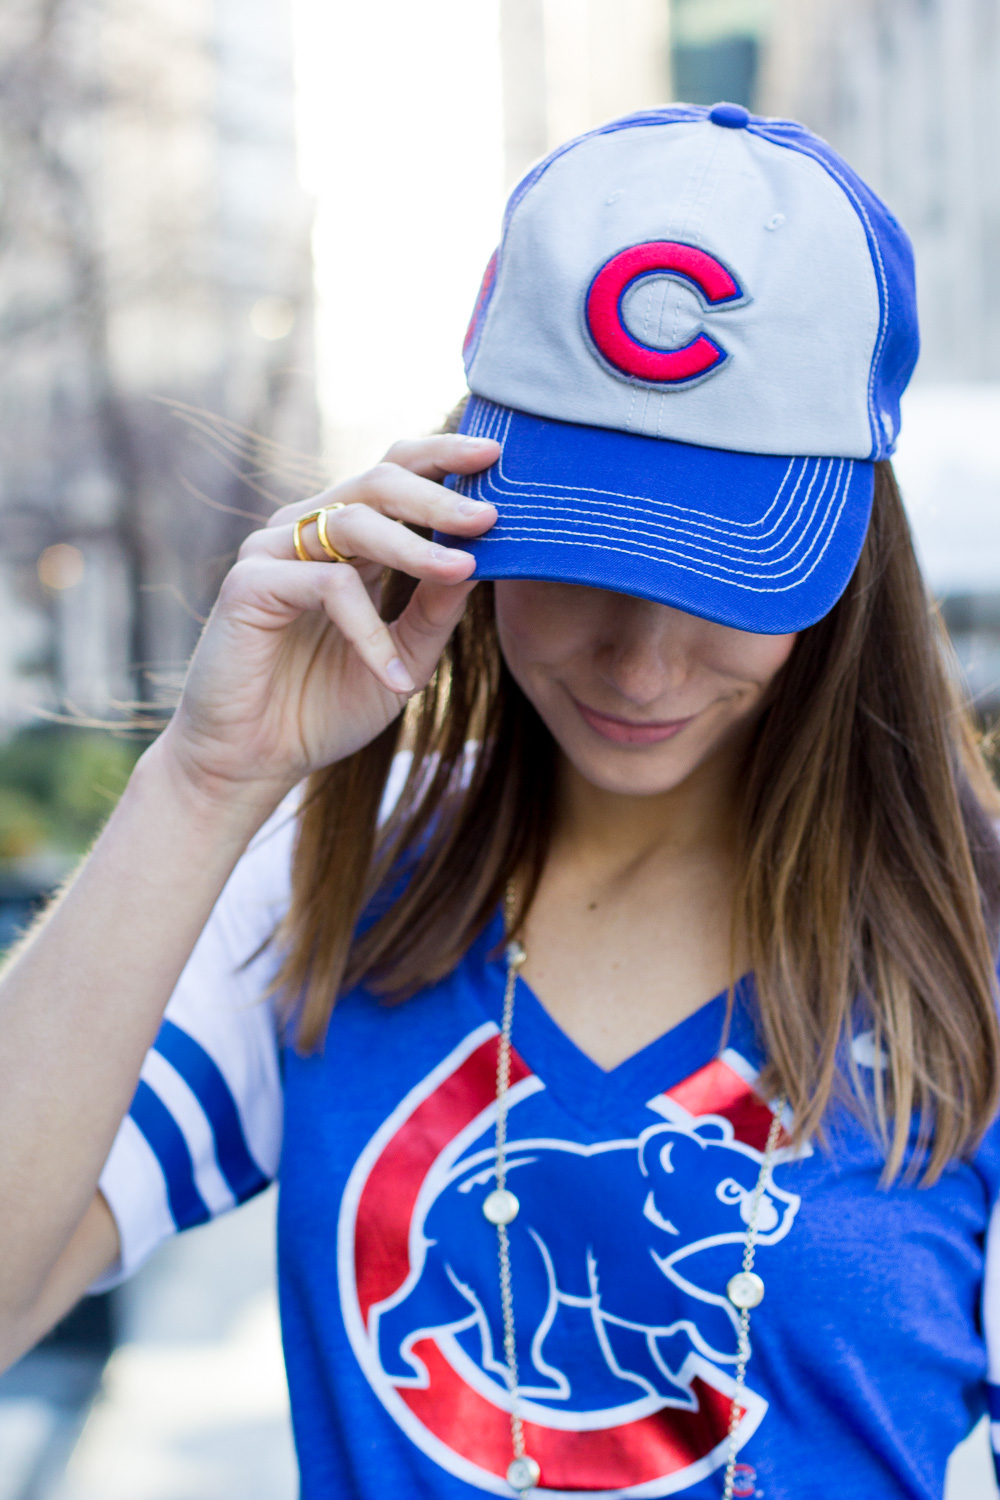 chicago cubs shirts near me